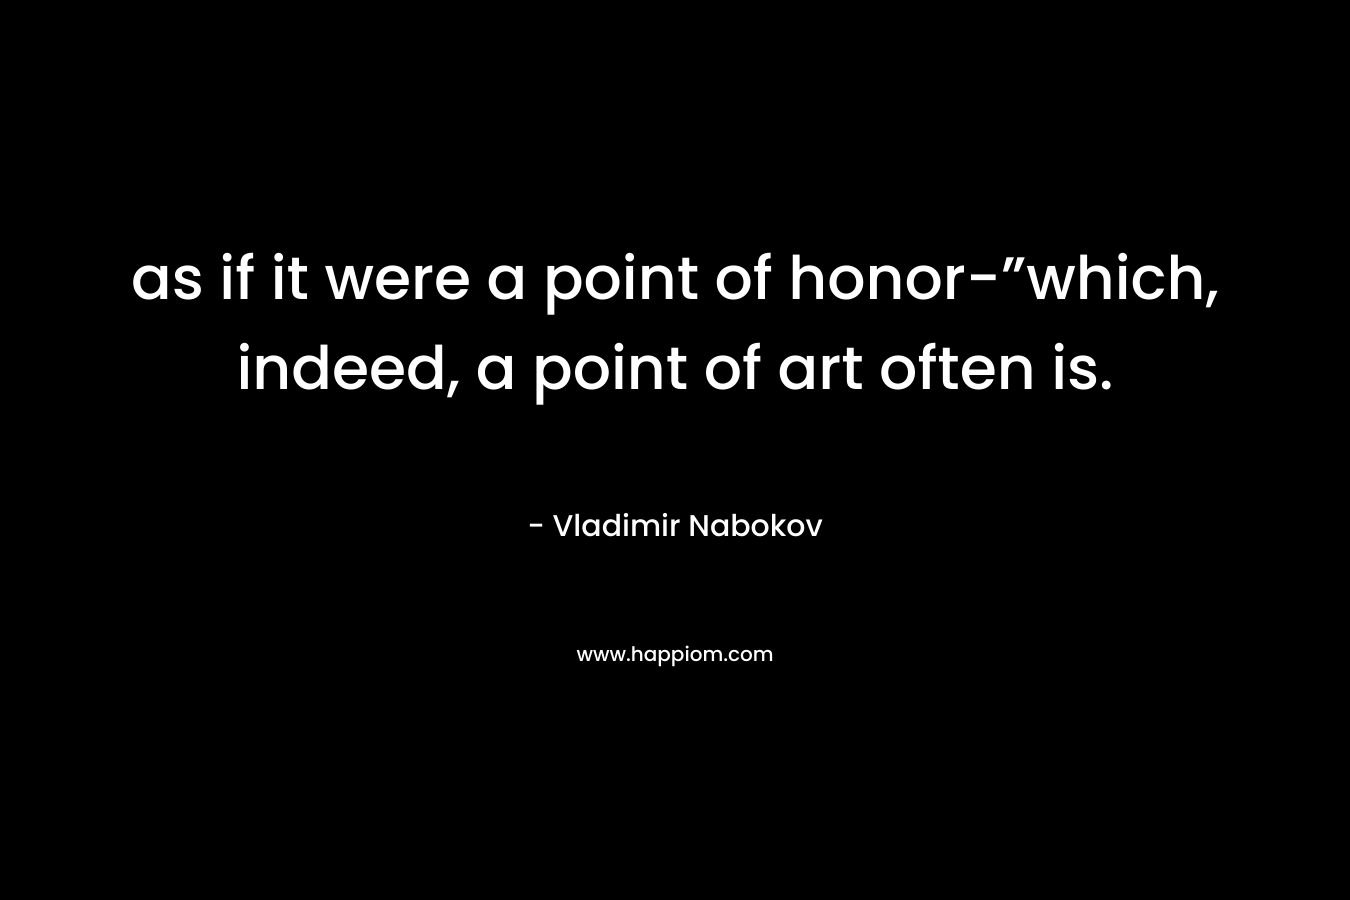 as if it were a point of honor-”which, indeed, a point of art often is.